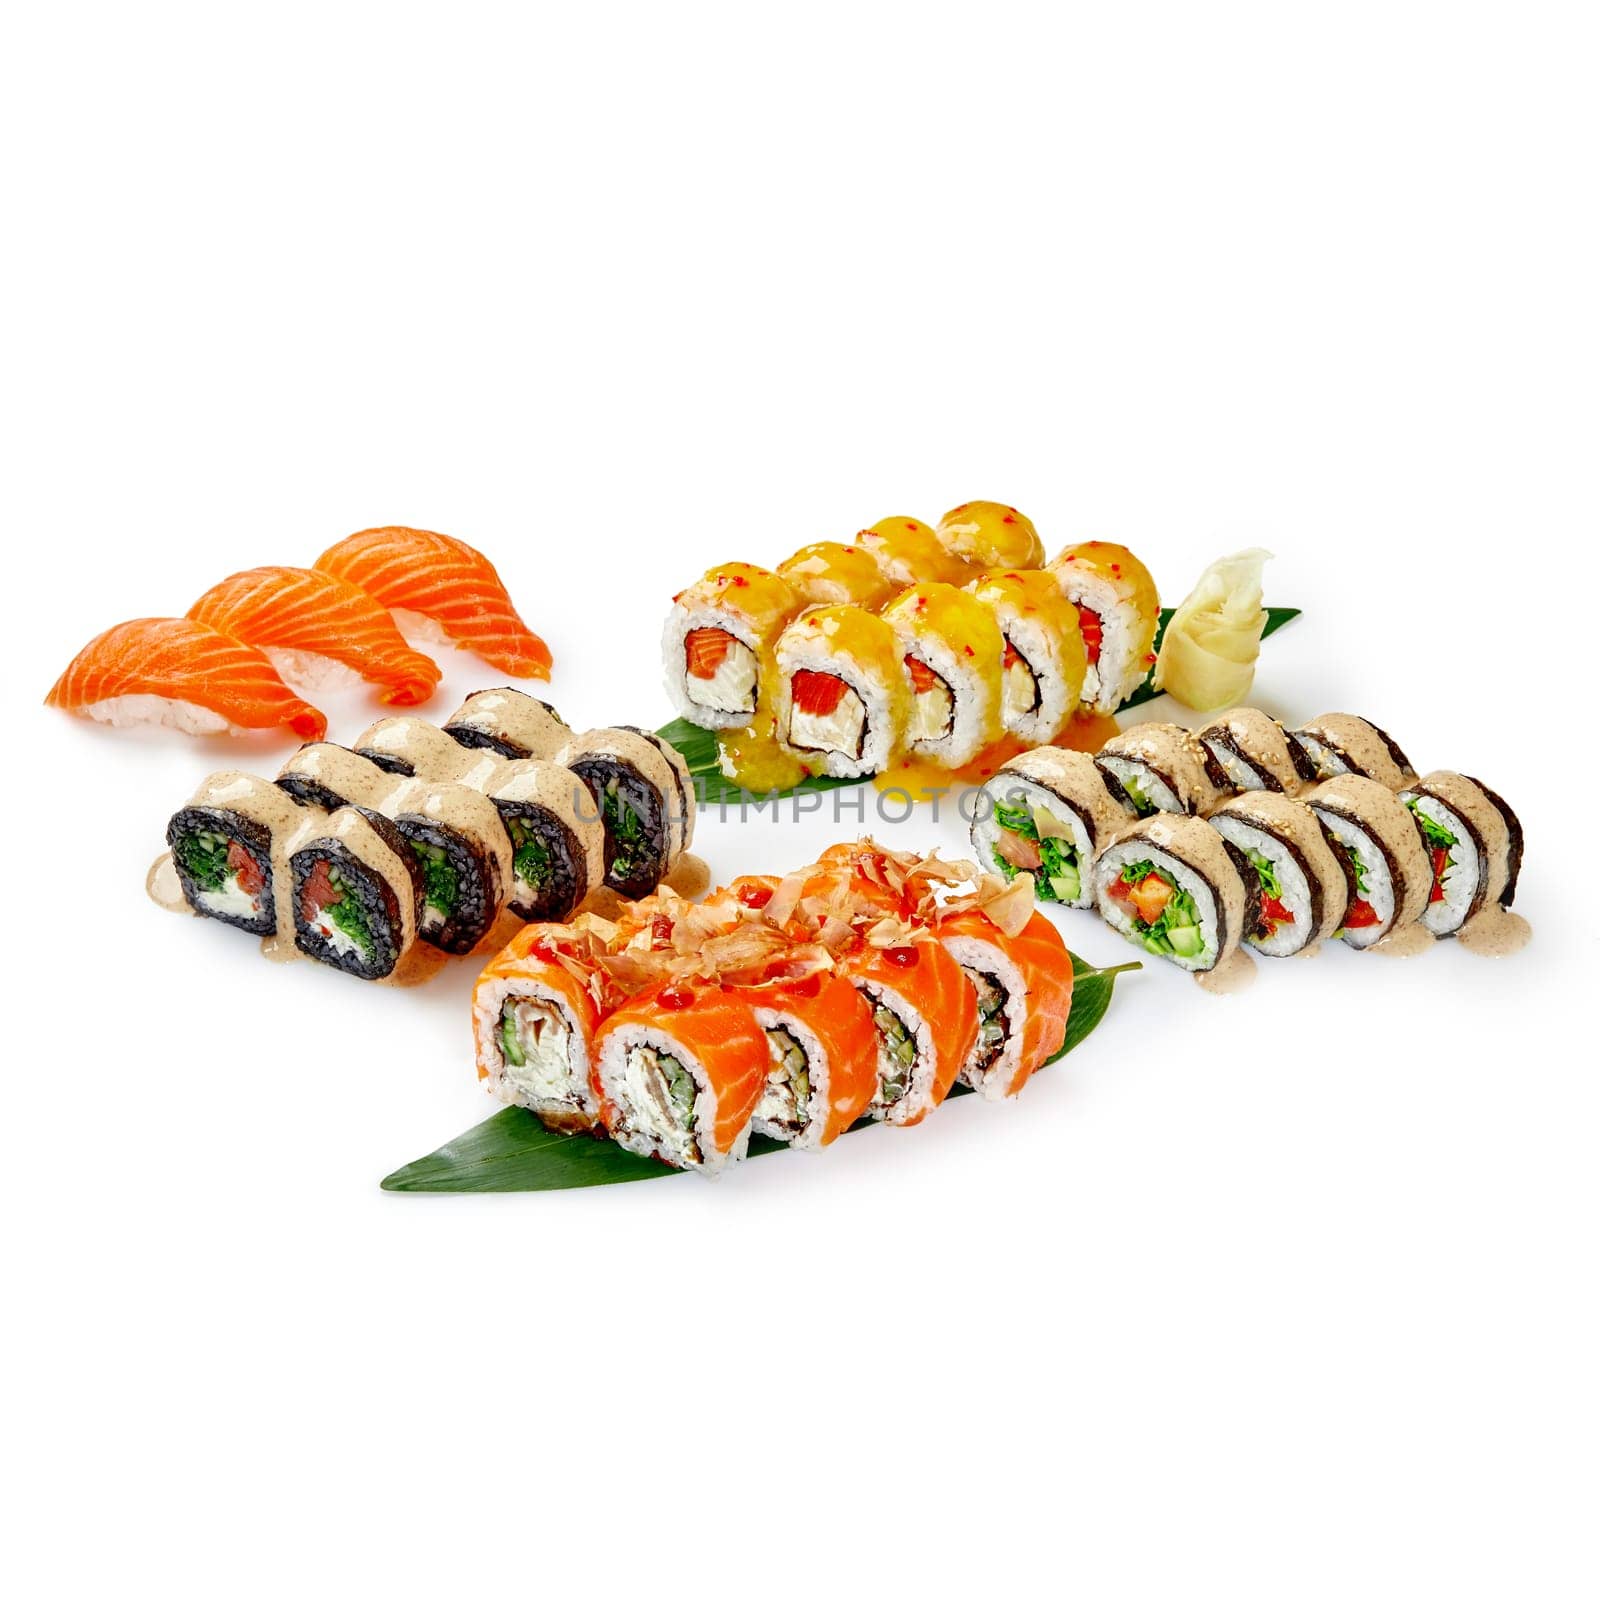 Set for company of traditional Japanese vegetarian futomaki, uramaki and nigiri sushi with salmon, eel and shrimp dressed with spicy sauces, on bamboo leaves with wasabi and ginger isolated on white